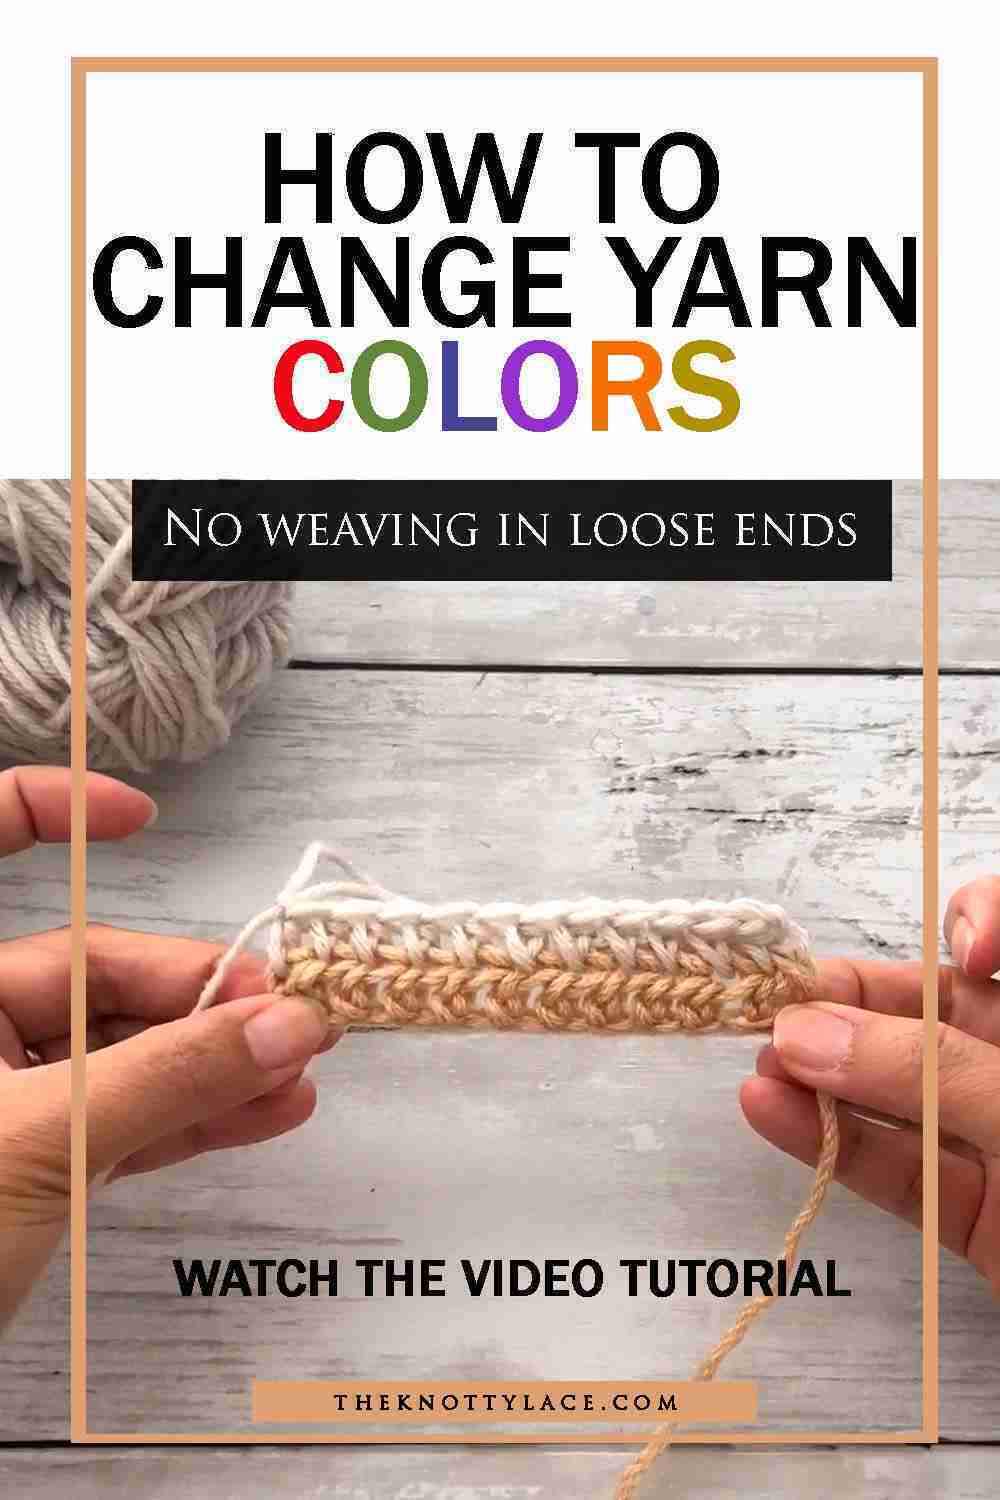 how-to-change-yarn-colors-no-weaving-ends-video-tutorial